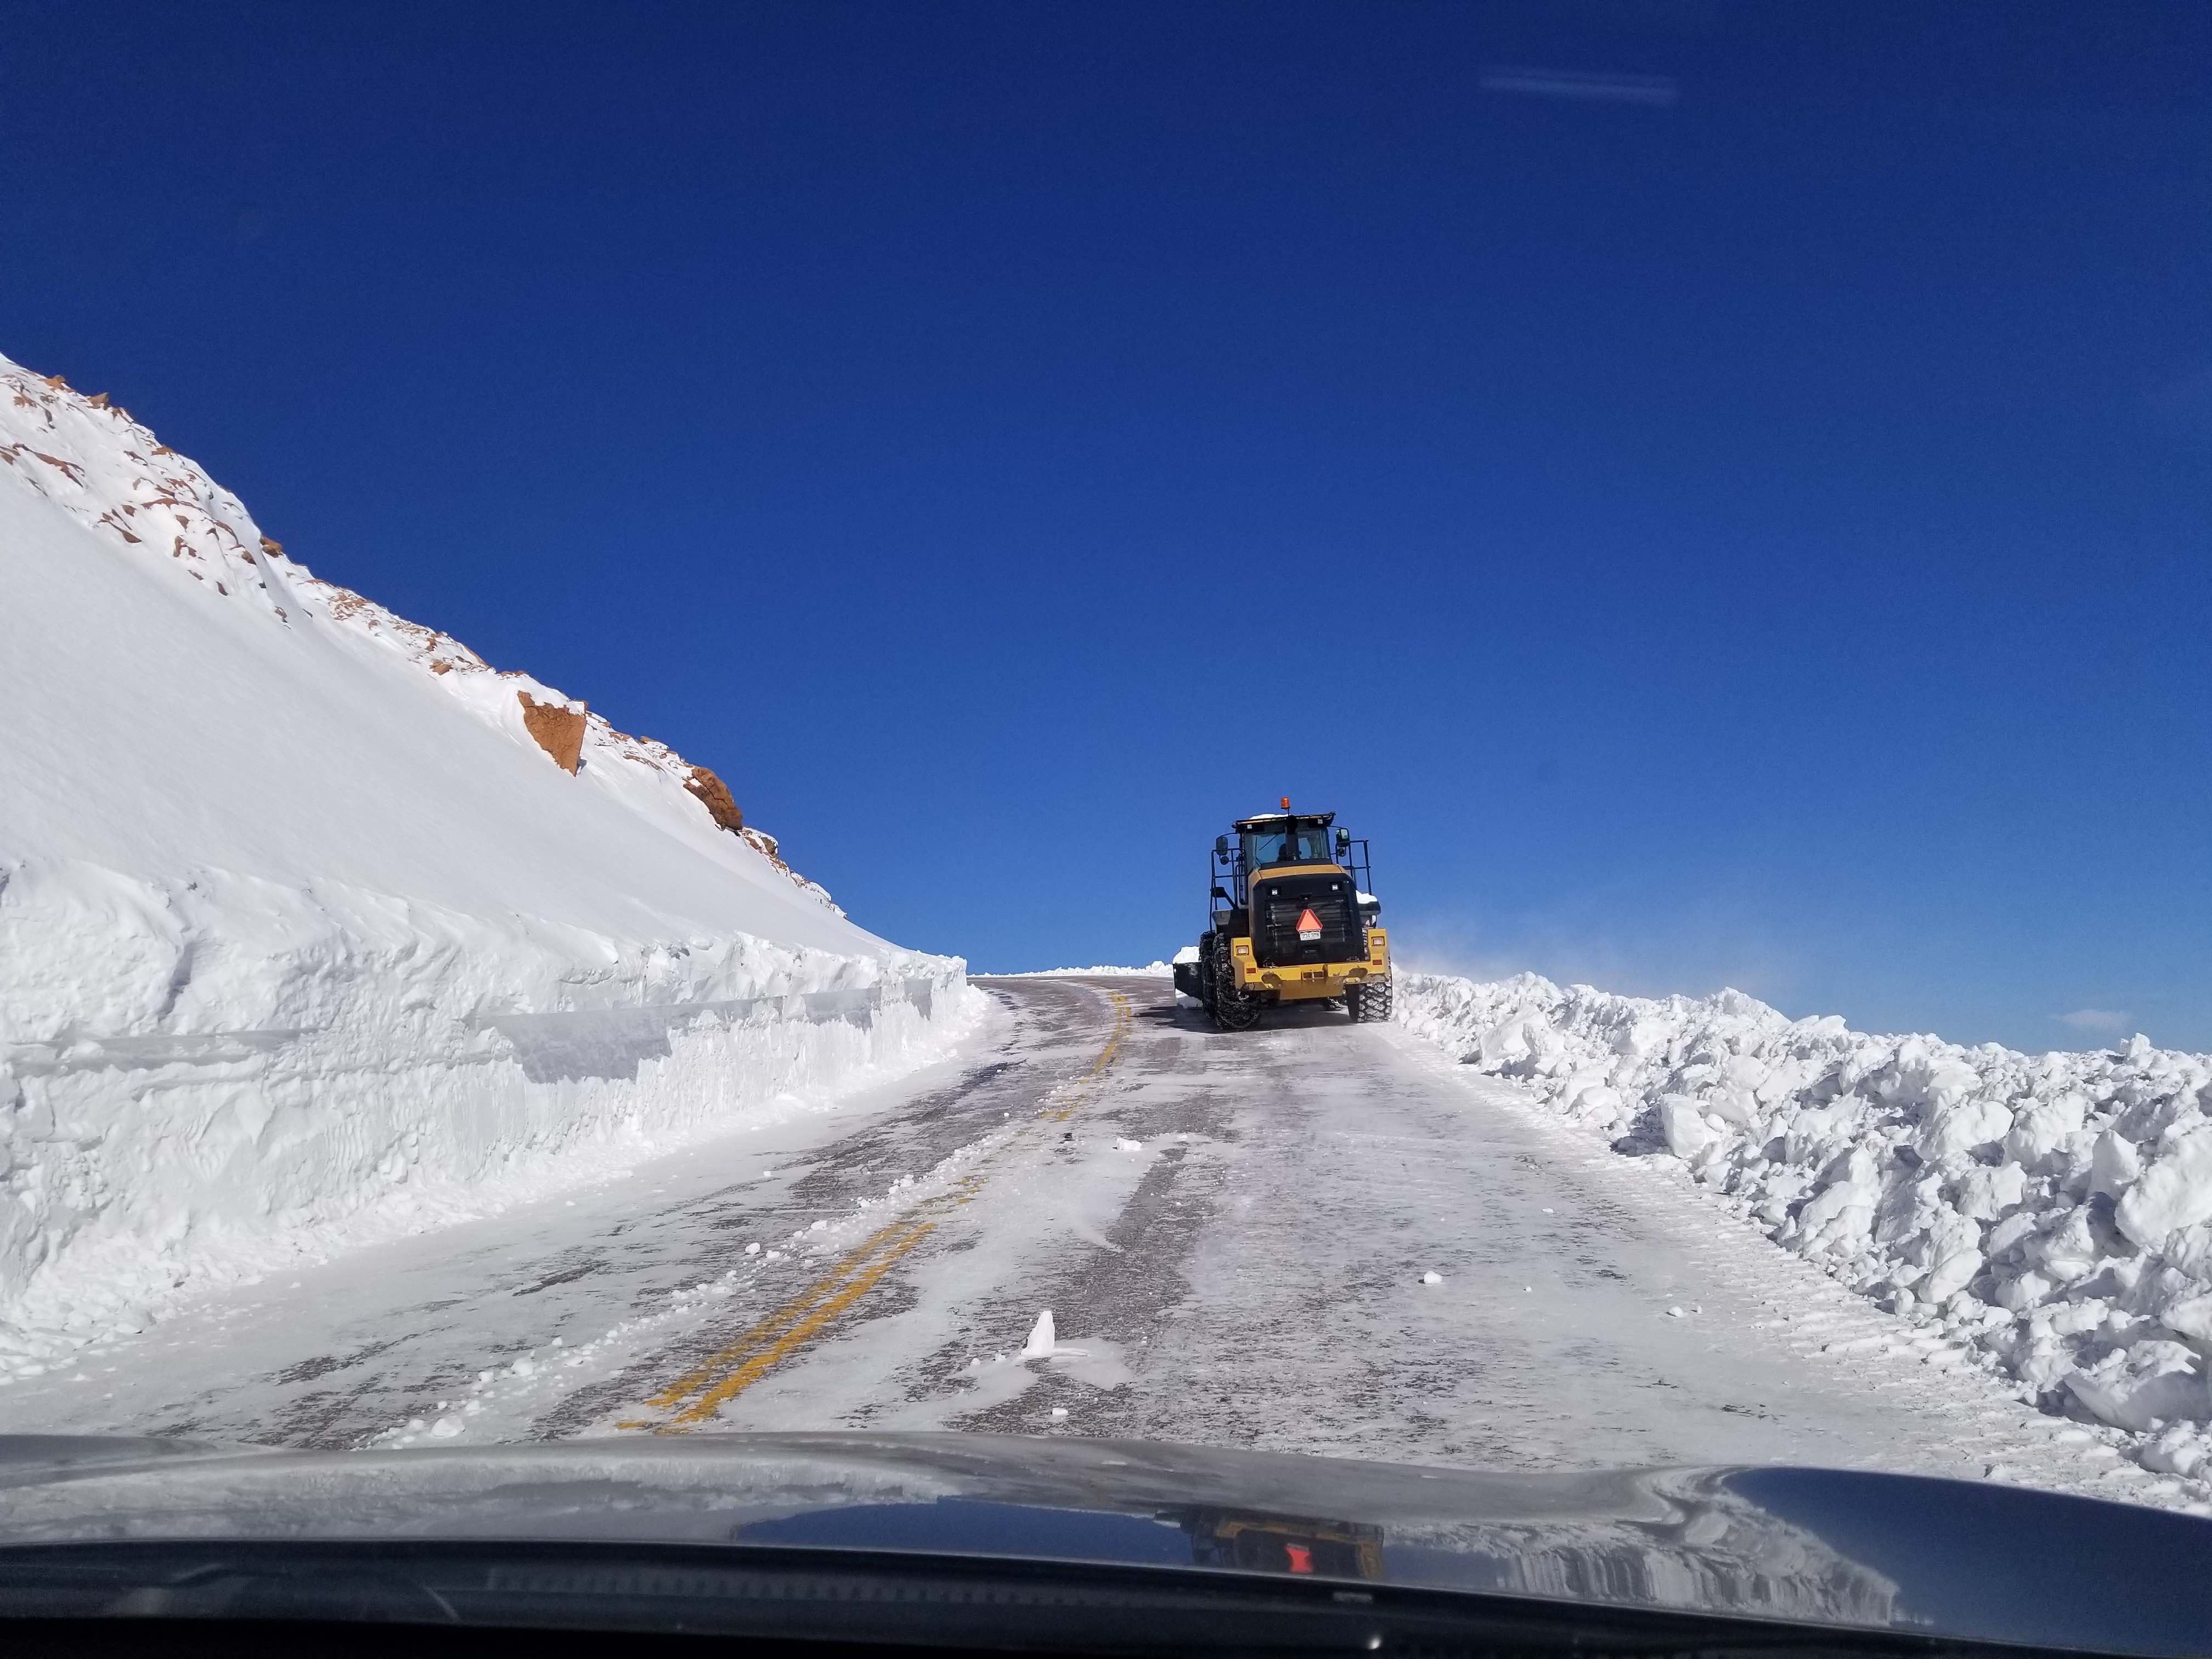 Pikes Peak Road with Snow